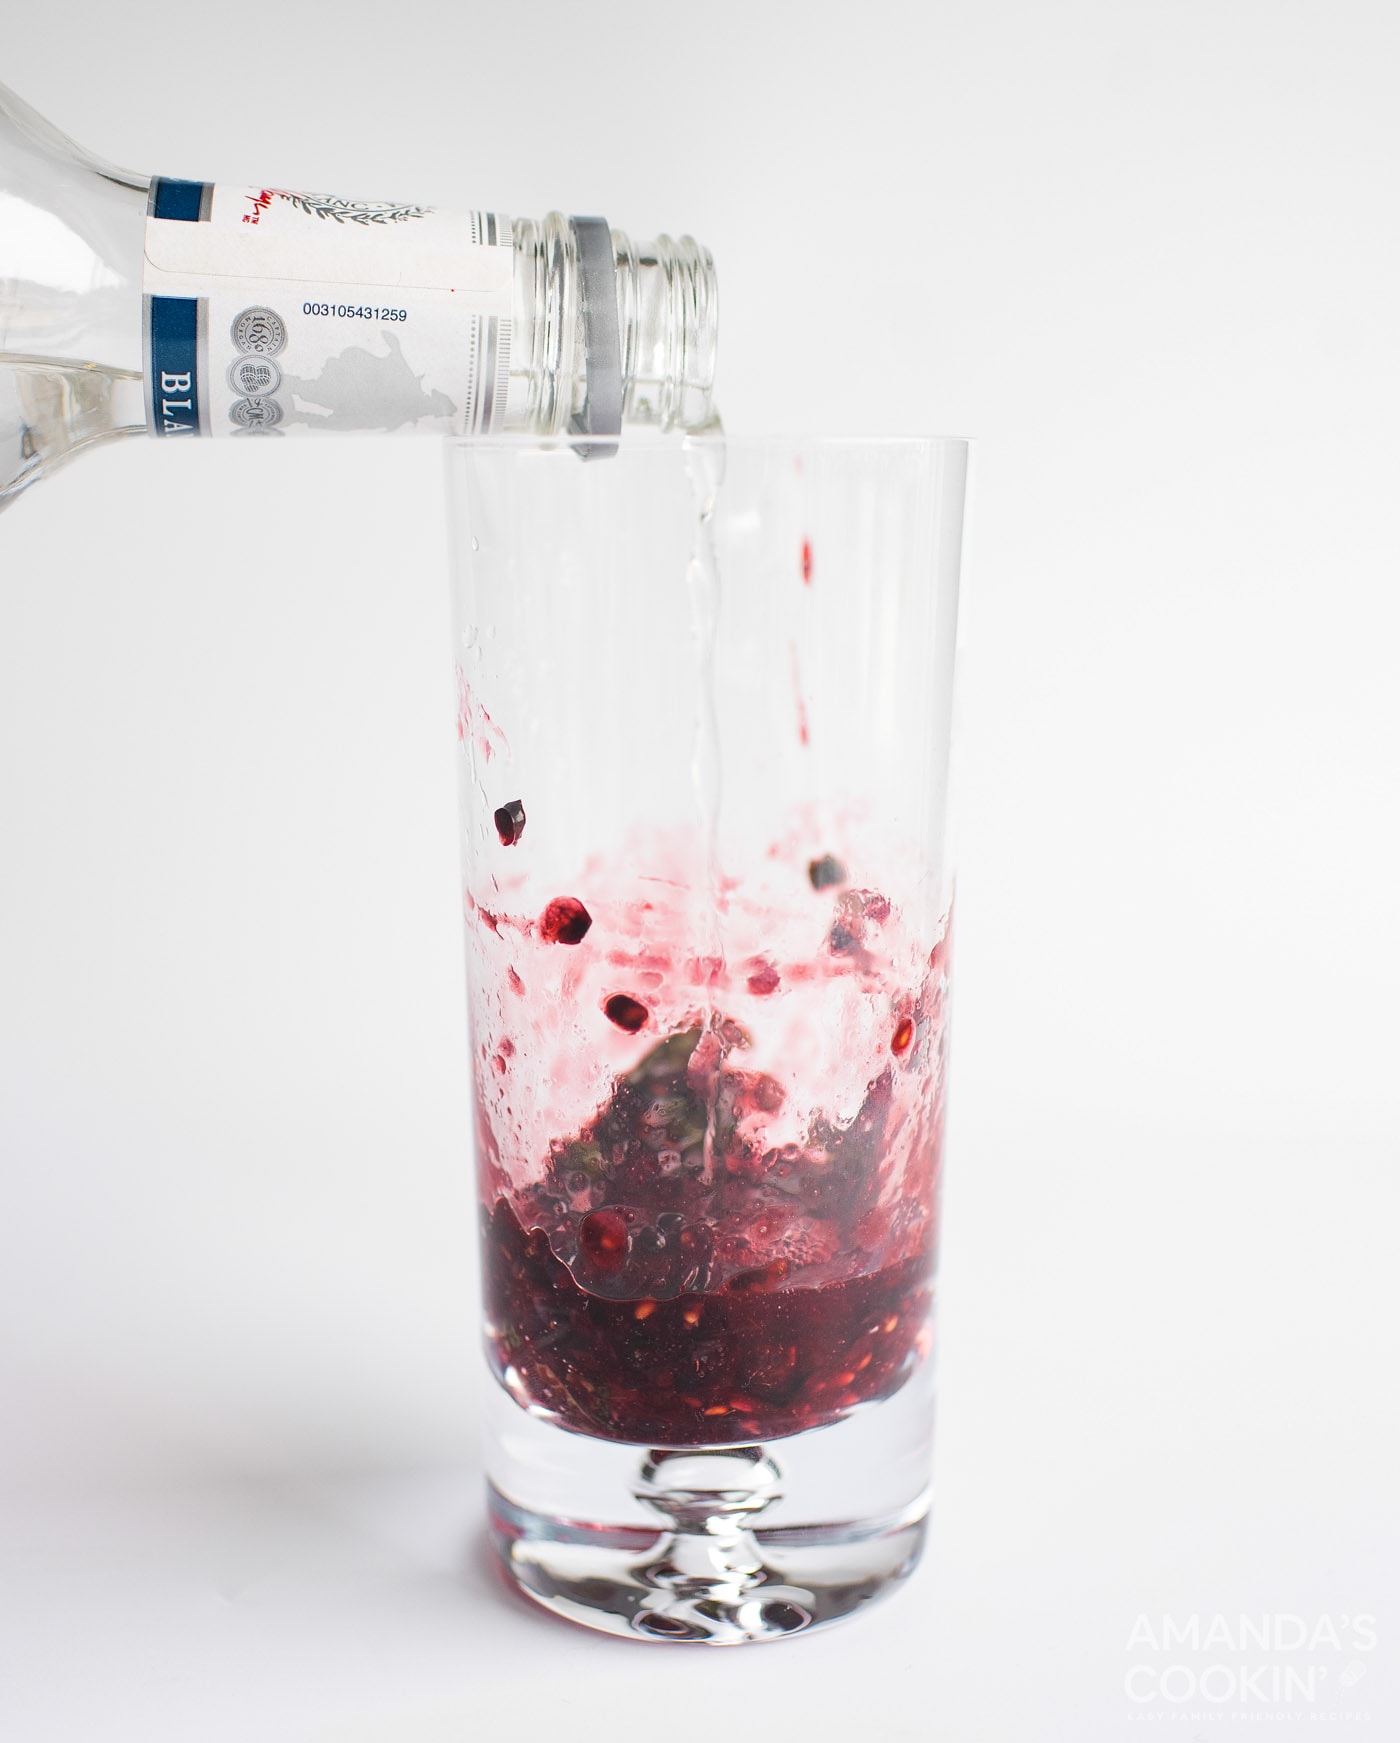 Pouring rum into muddle blackberries and mint in a glass